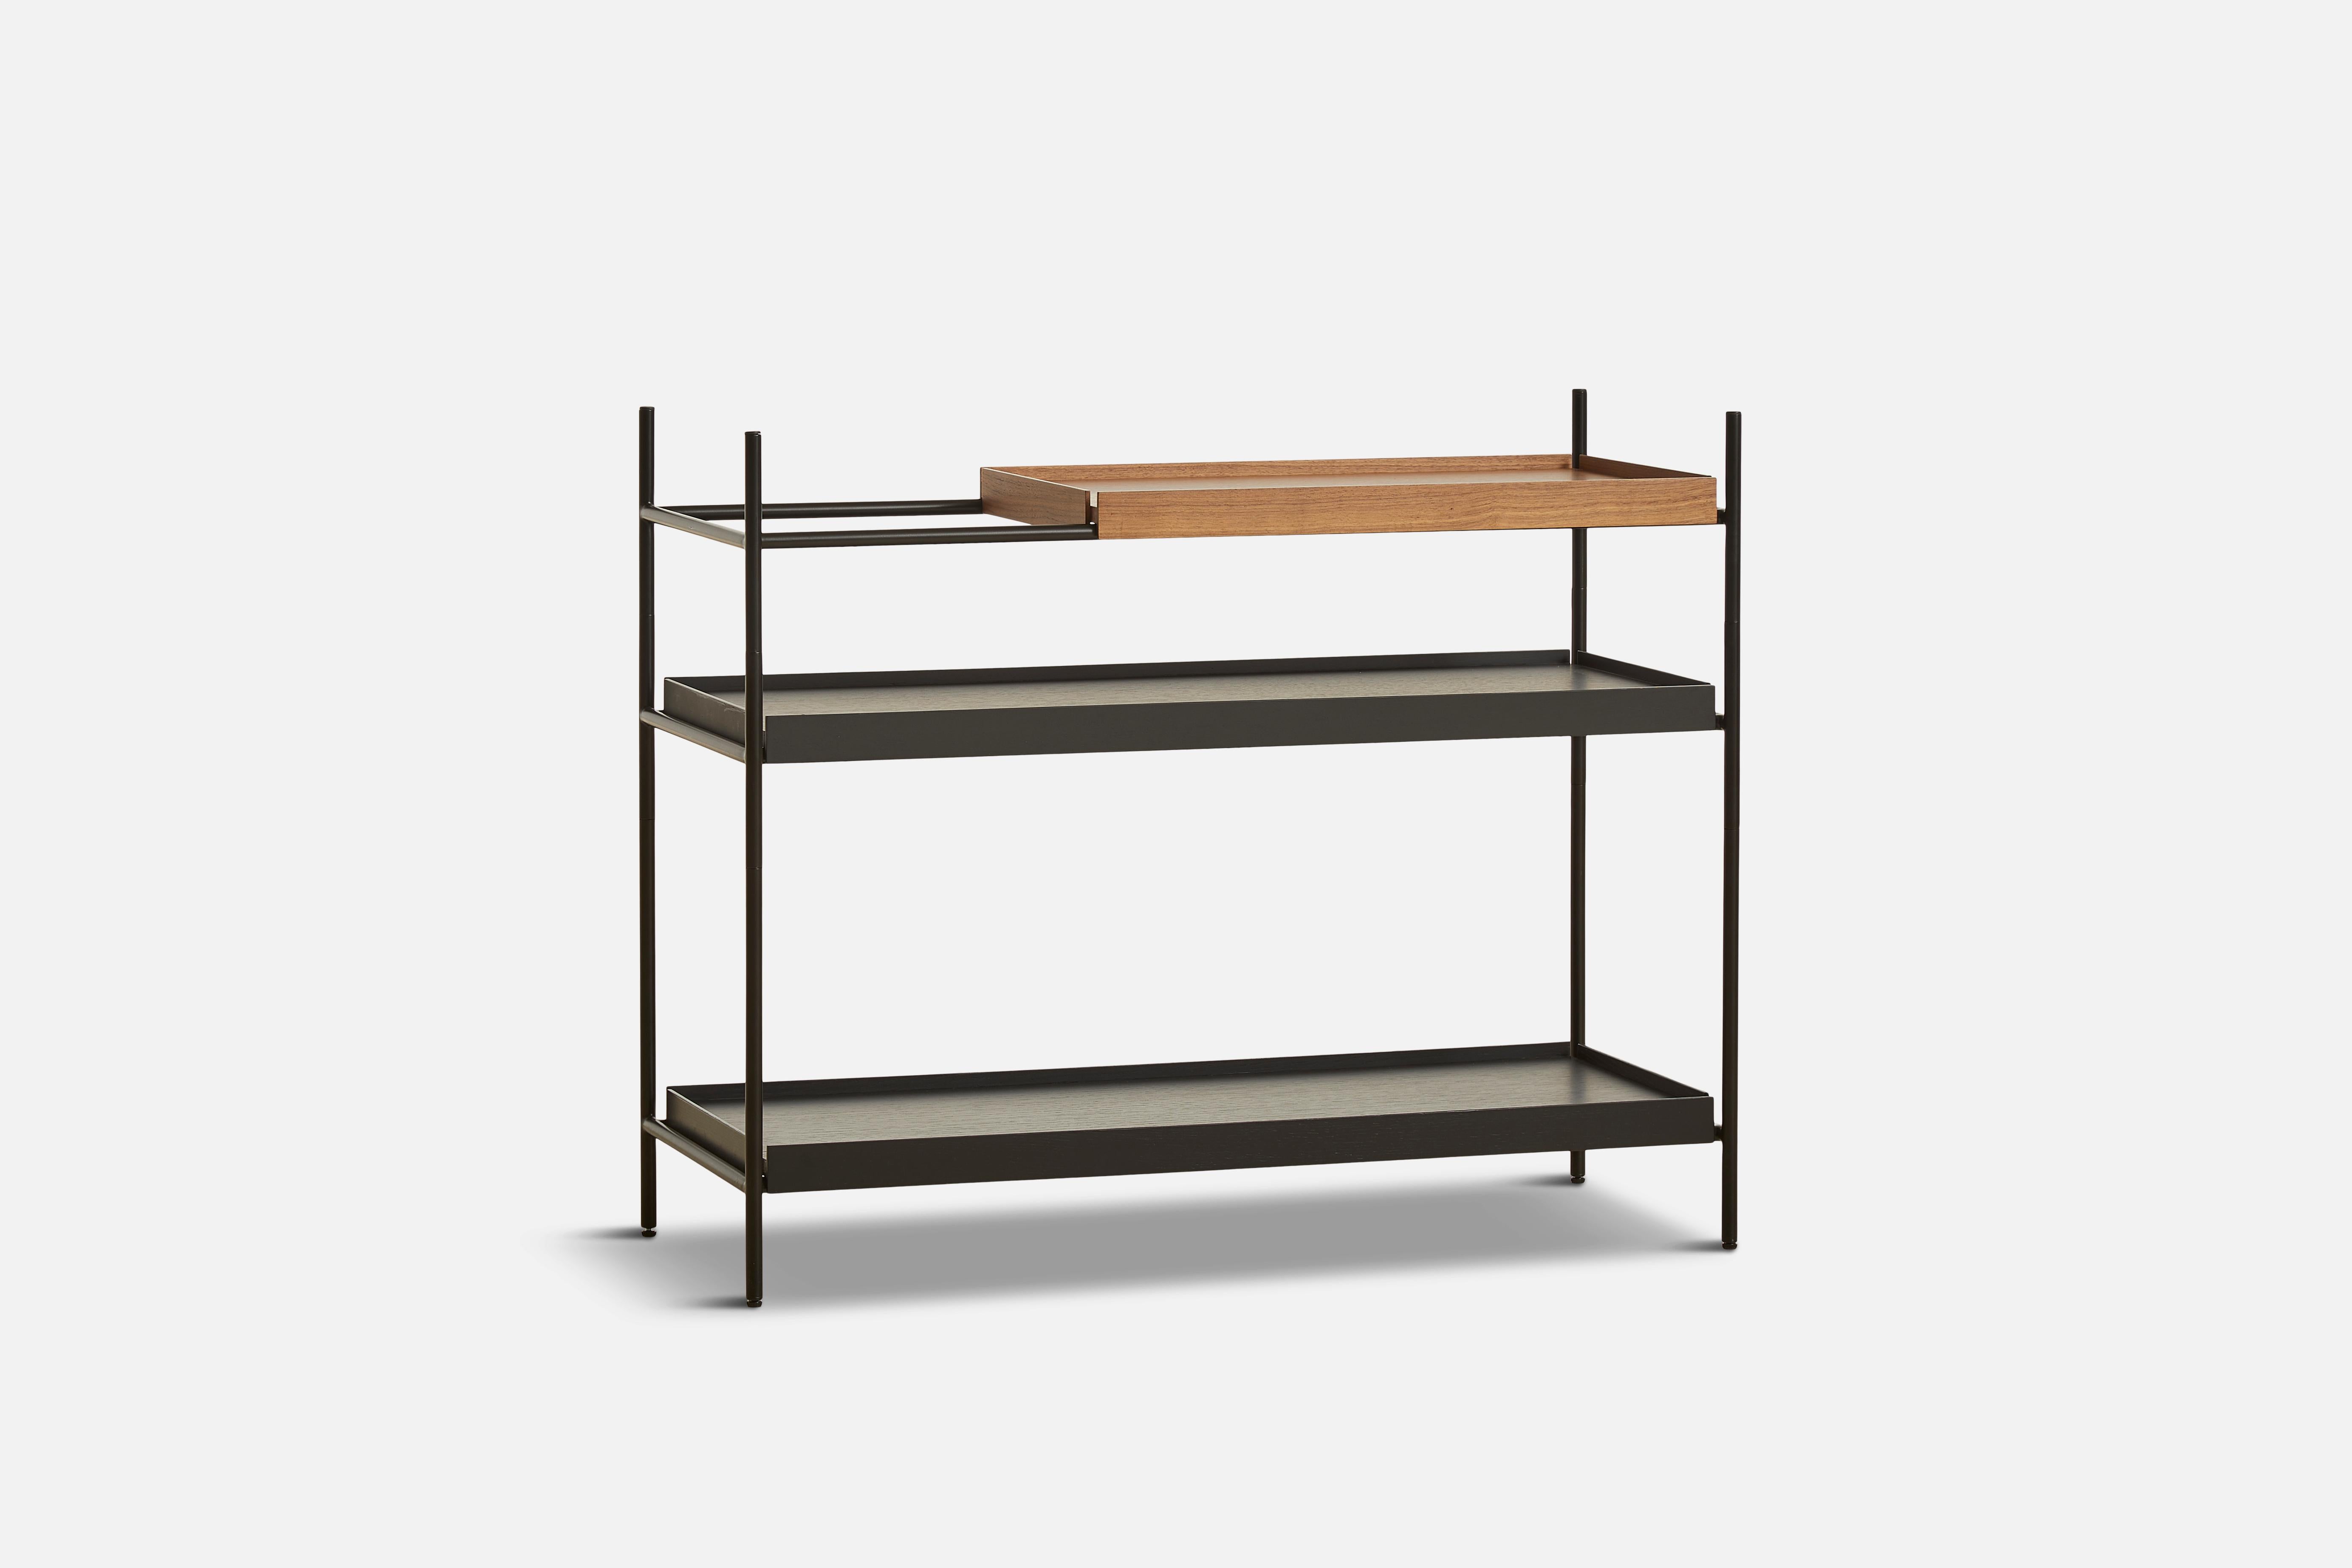 Low walnut and black tray shelf II by Hanne Willmann
Materials: metal, walnut.
Dimensions: D 40 x W 100 x H 81 cm.
Also available in different tray combinations and 2 sizes: H81, H 201 cm.

Hanne Willmann is a dynamic German designer with her